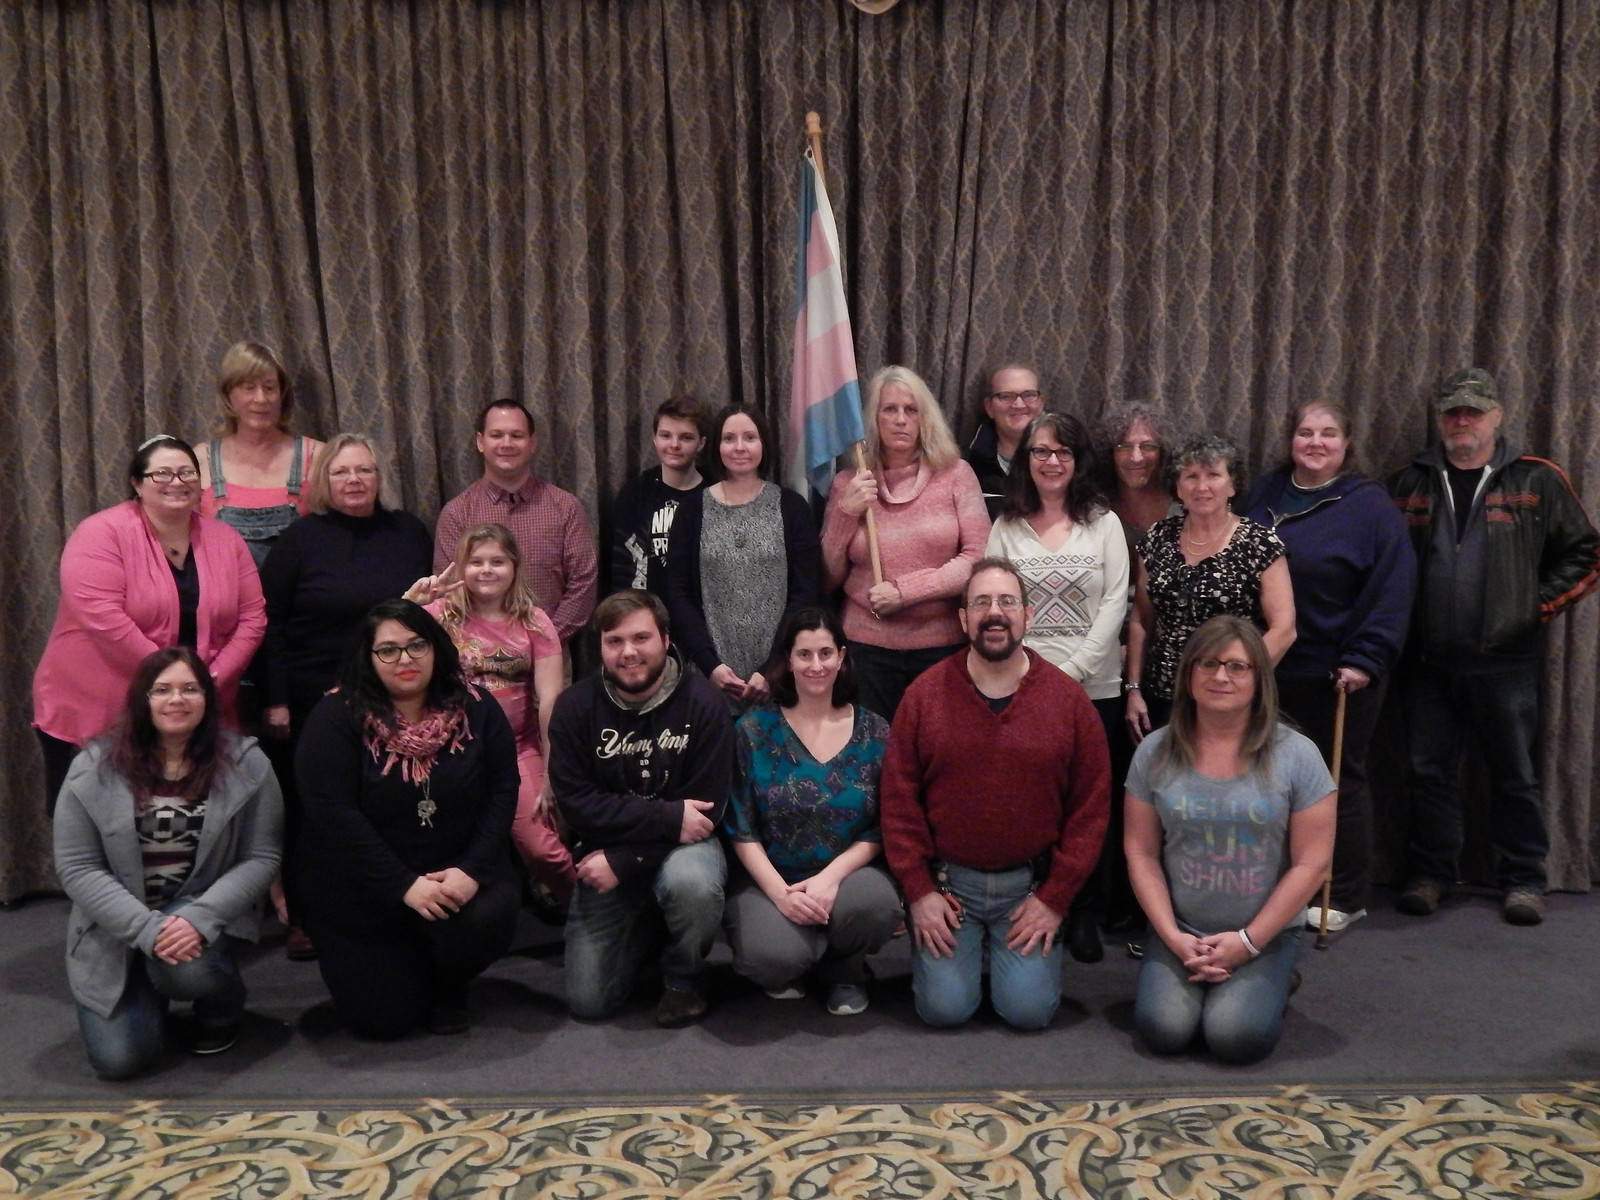 Group photo with Trans Pride flag